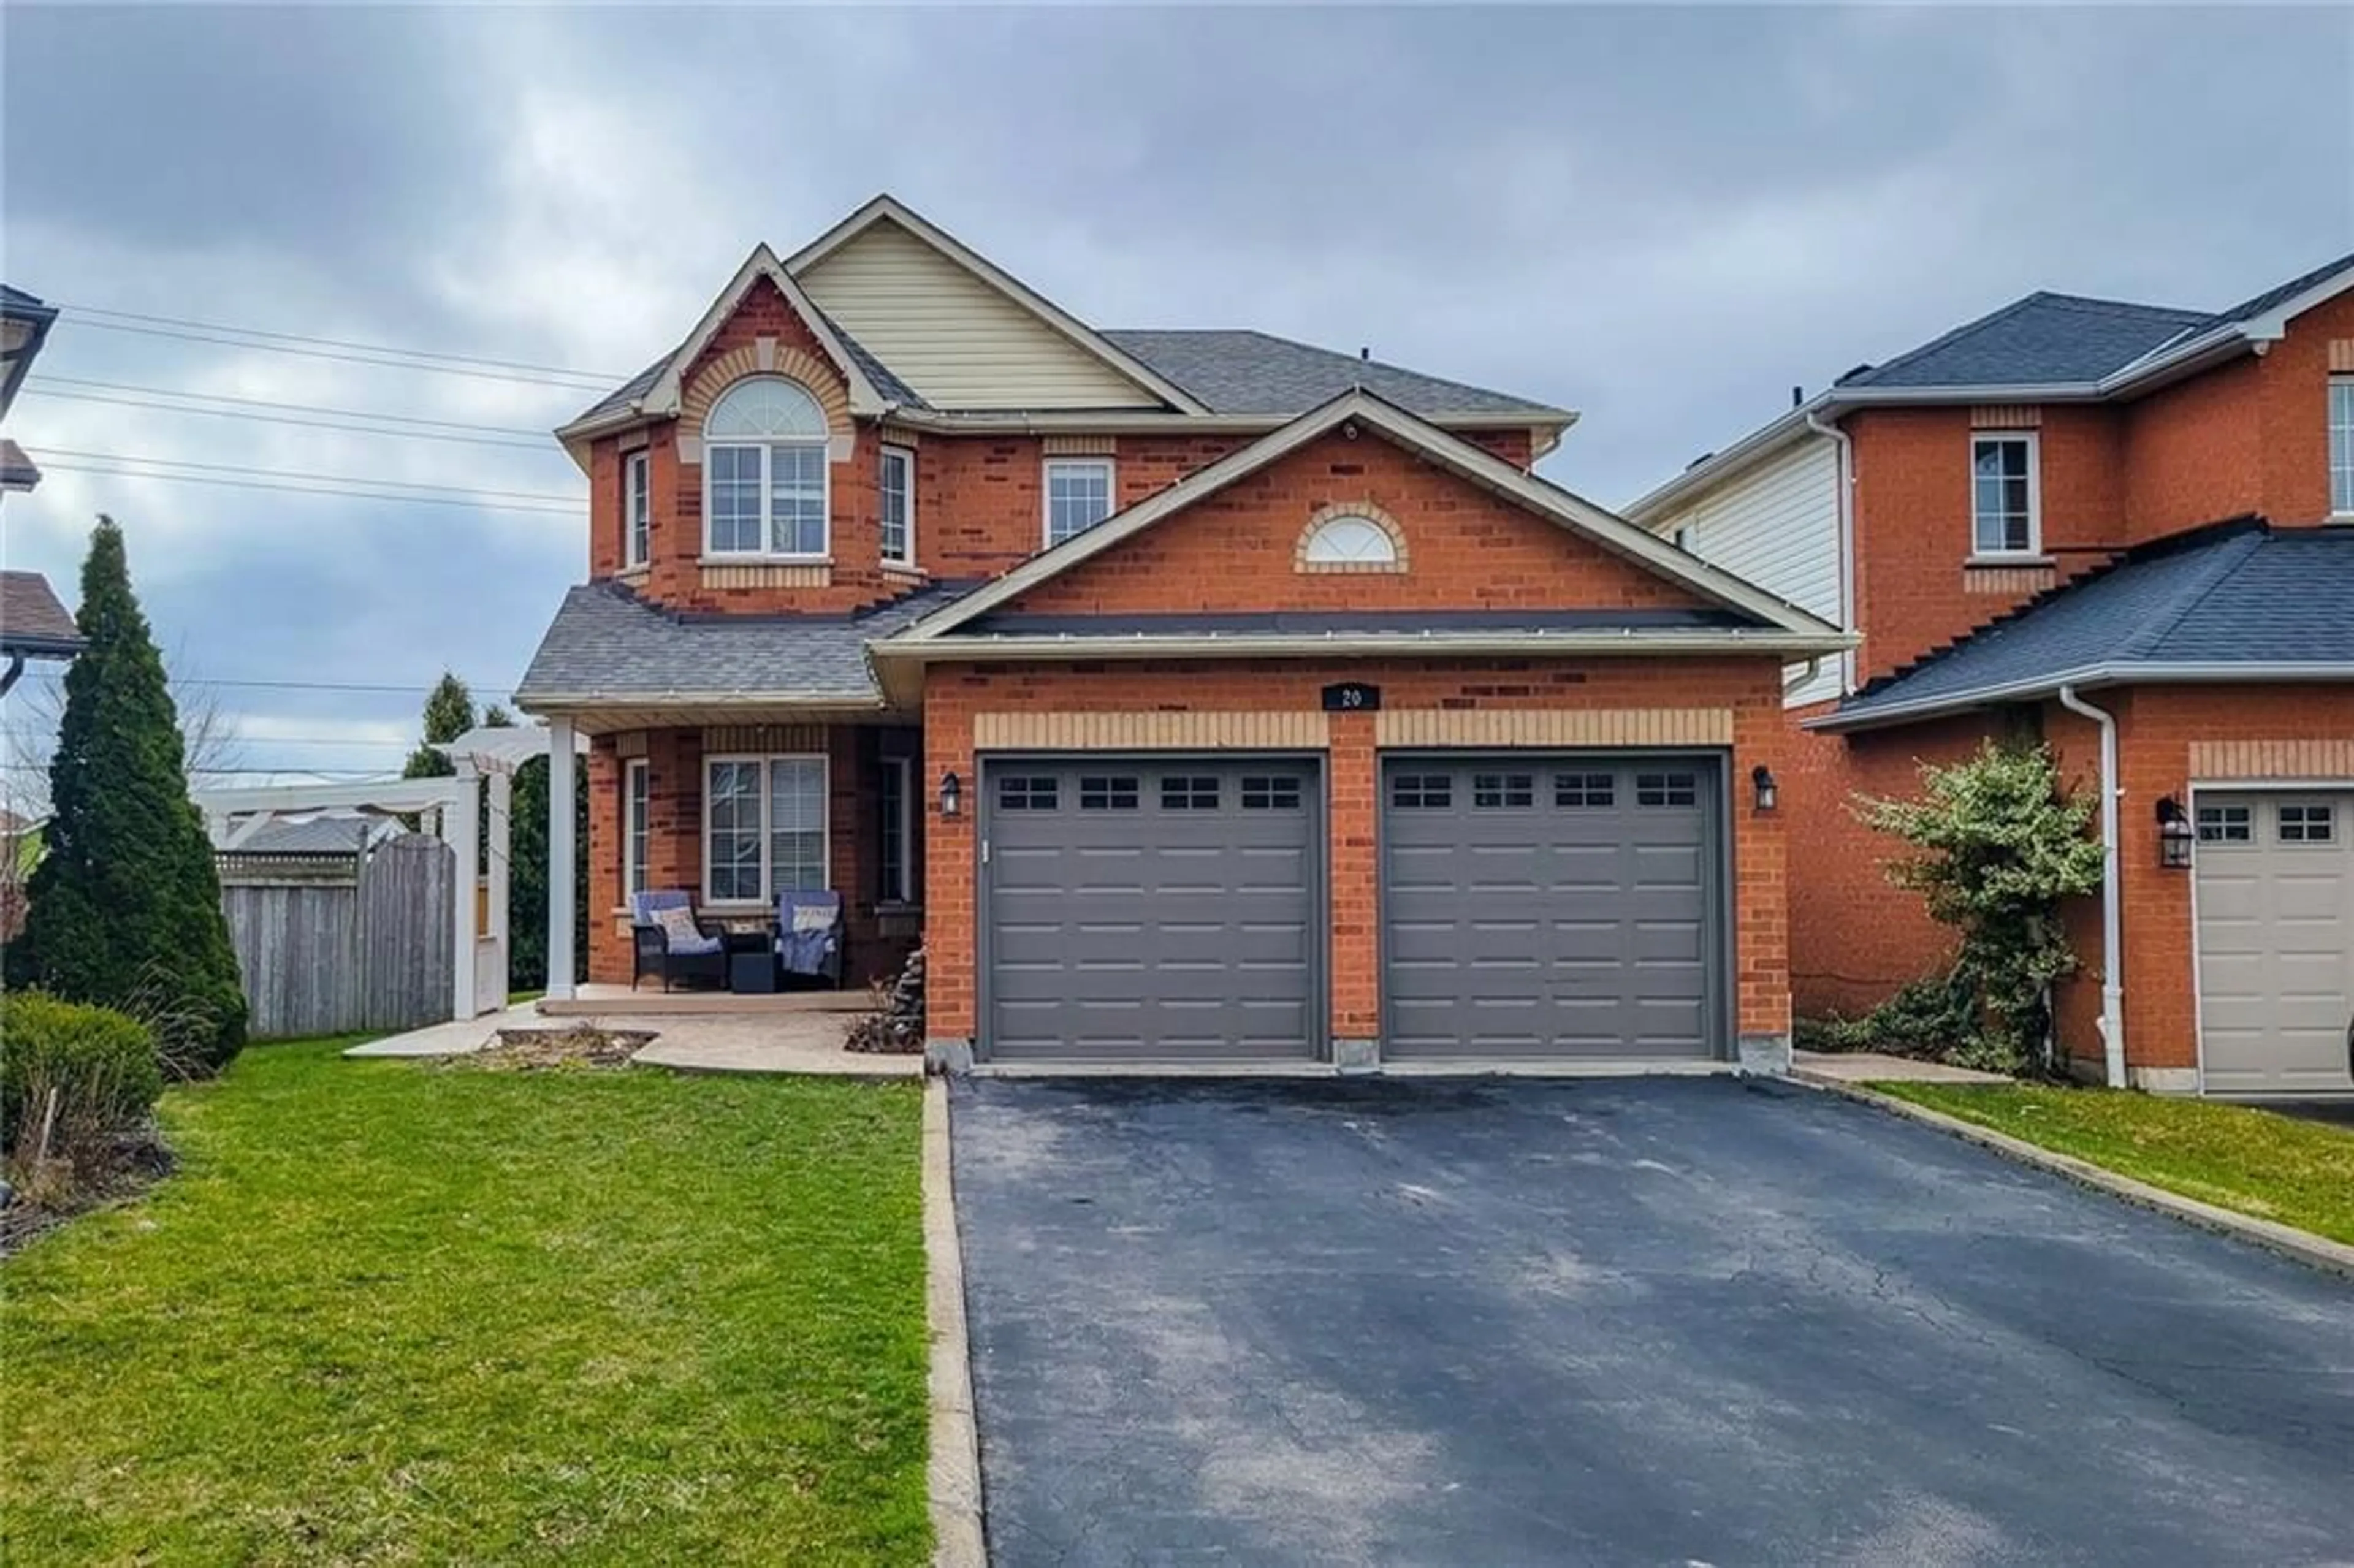 Home with brick exterior material for 20 pentland Rd, Waterdown Ontario L0R 2H5